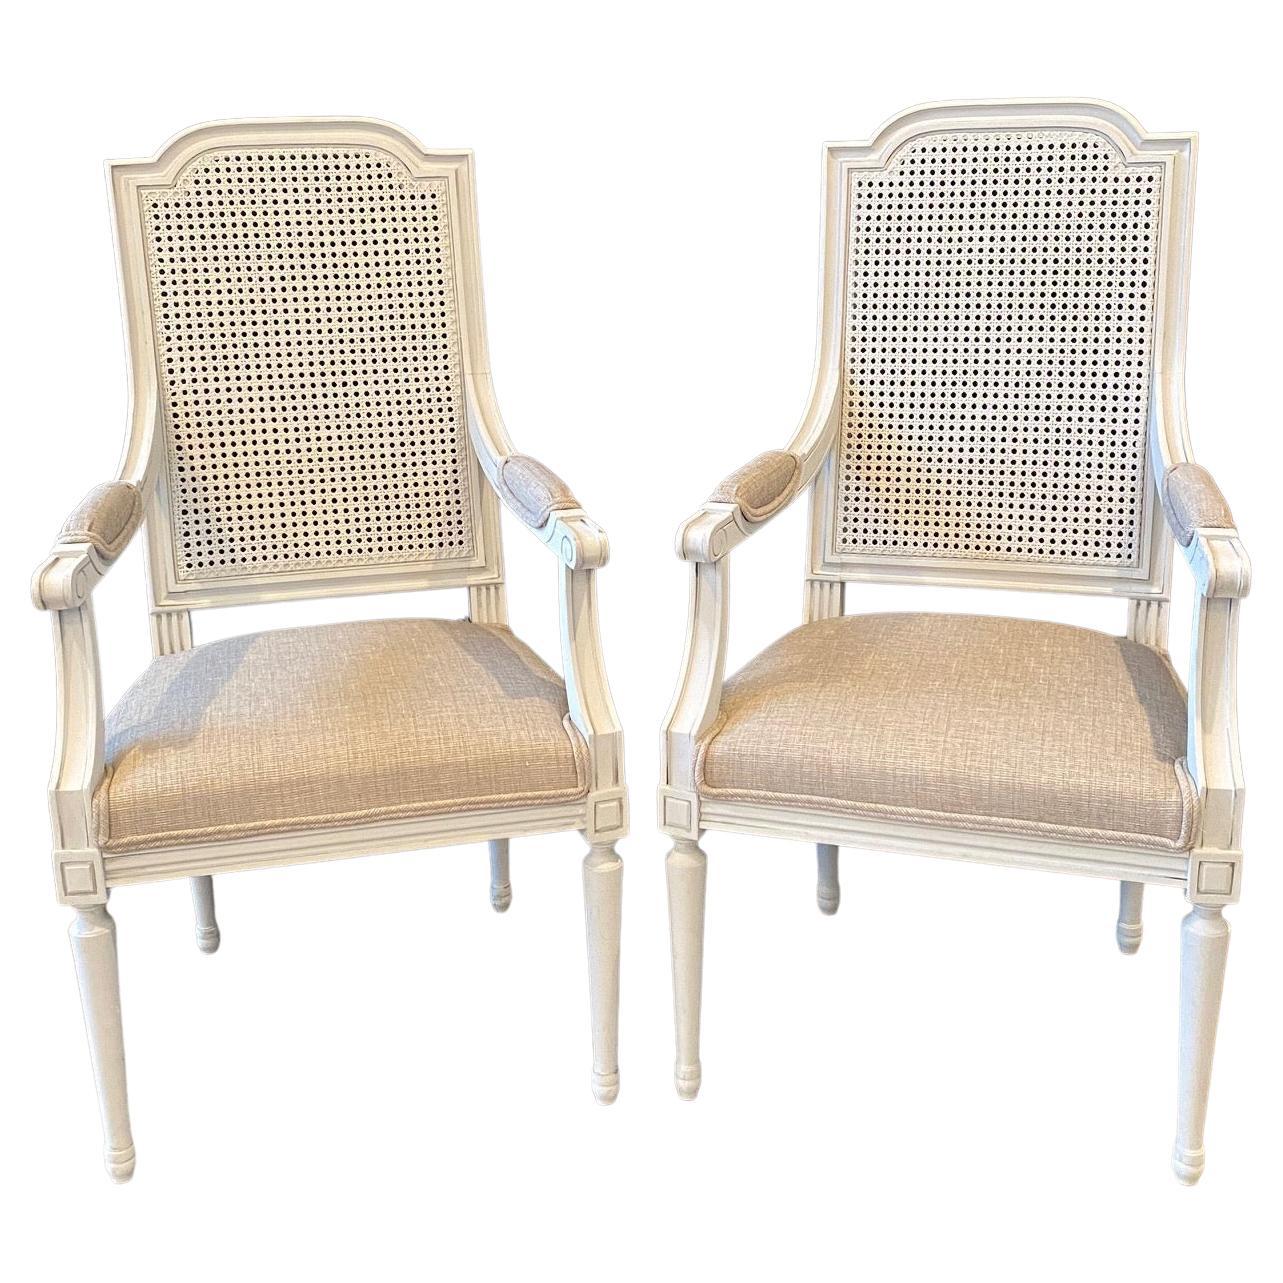 Lovely Pair of French Louis XVI White Painted Armchairs 